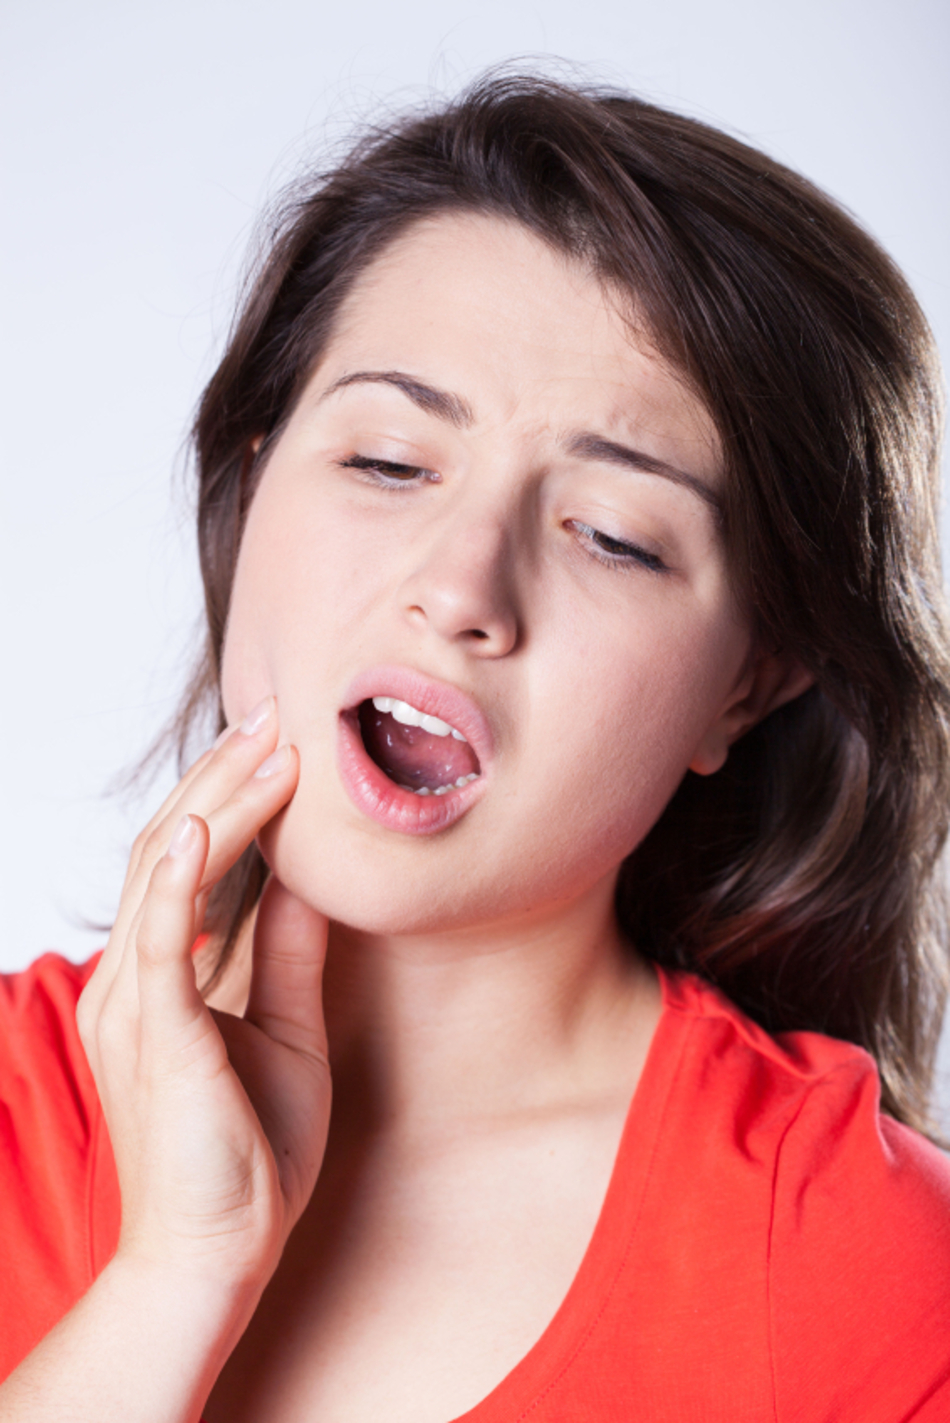 Excessive Chewing Could Cause Jaw Pain